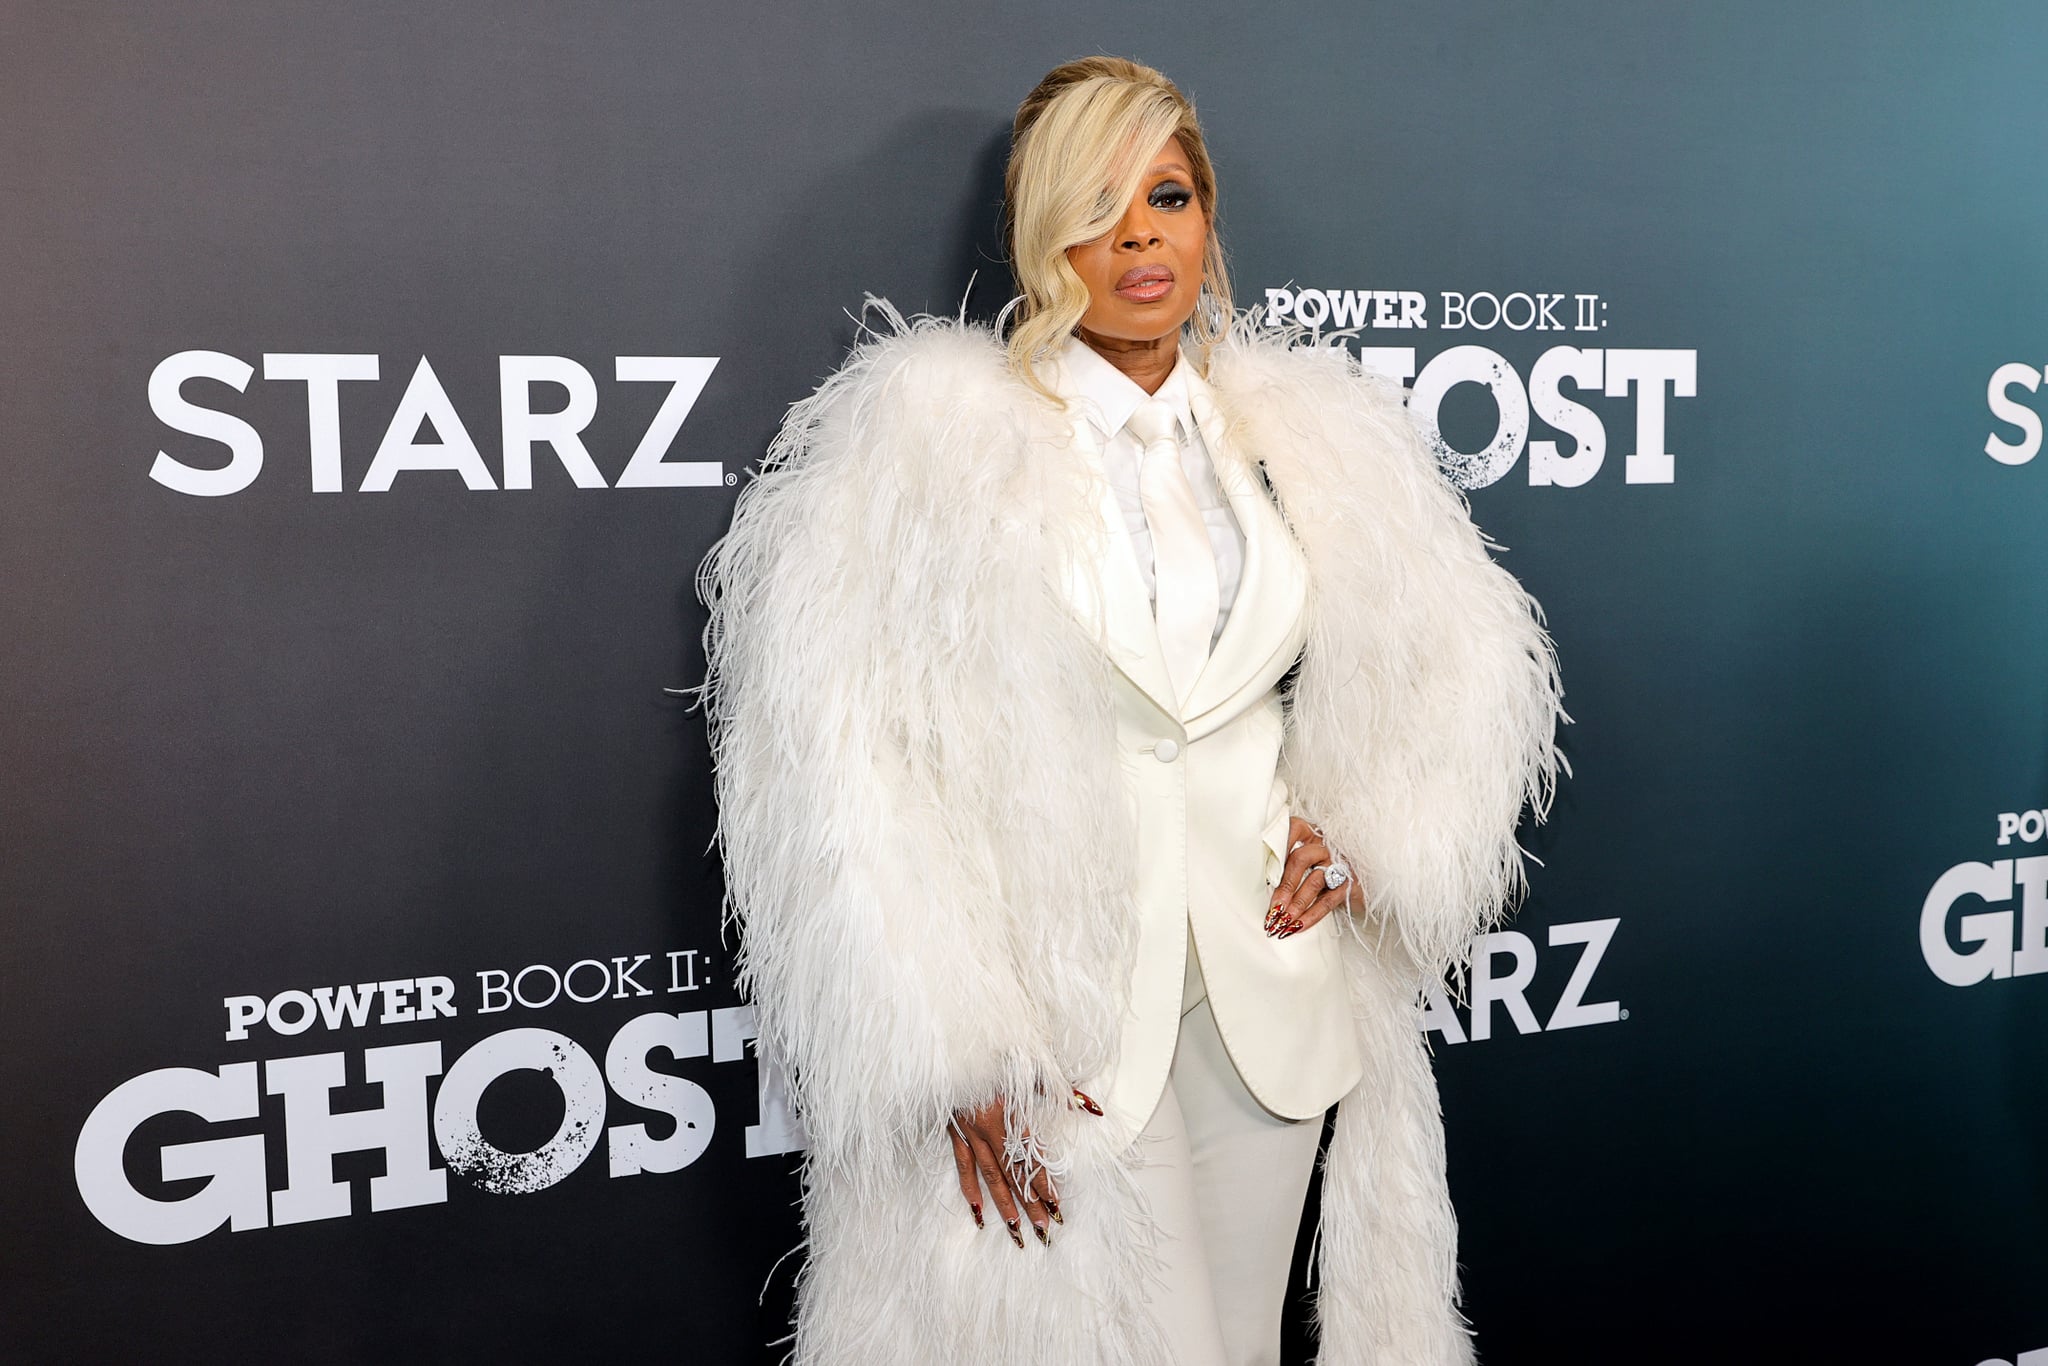 NEW YORK, NEW YORK - NOVEMBER 17: Mary J. Blige attends the Ghost Season 2 Premiere on November 17, 2021 in New York City. (Photo by Jamie McCarthy/Getty Images for STARZ)